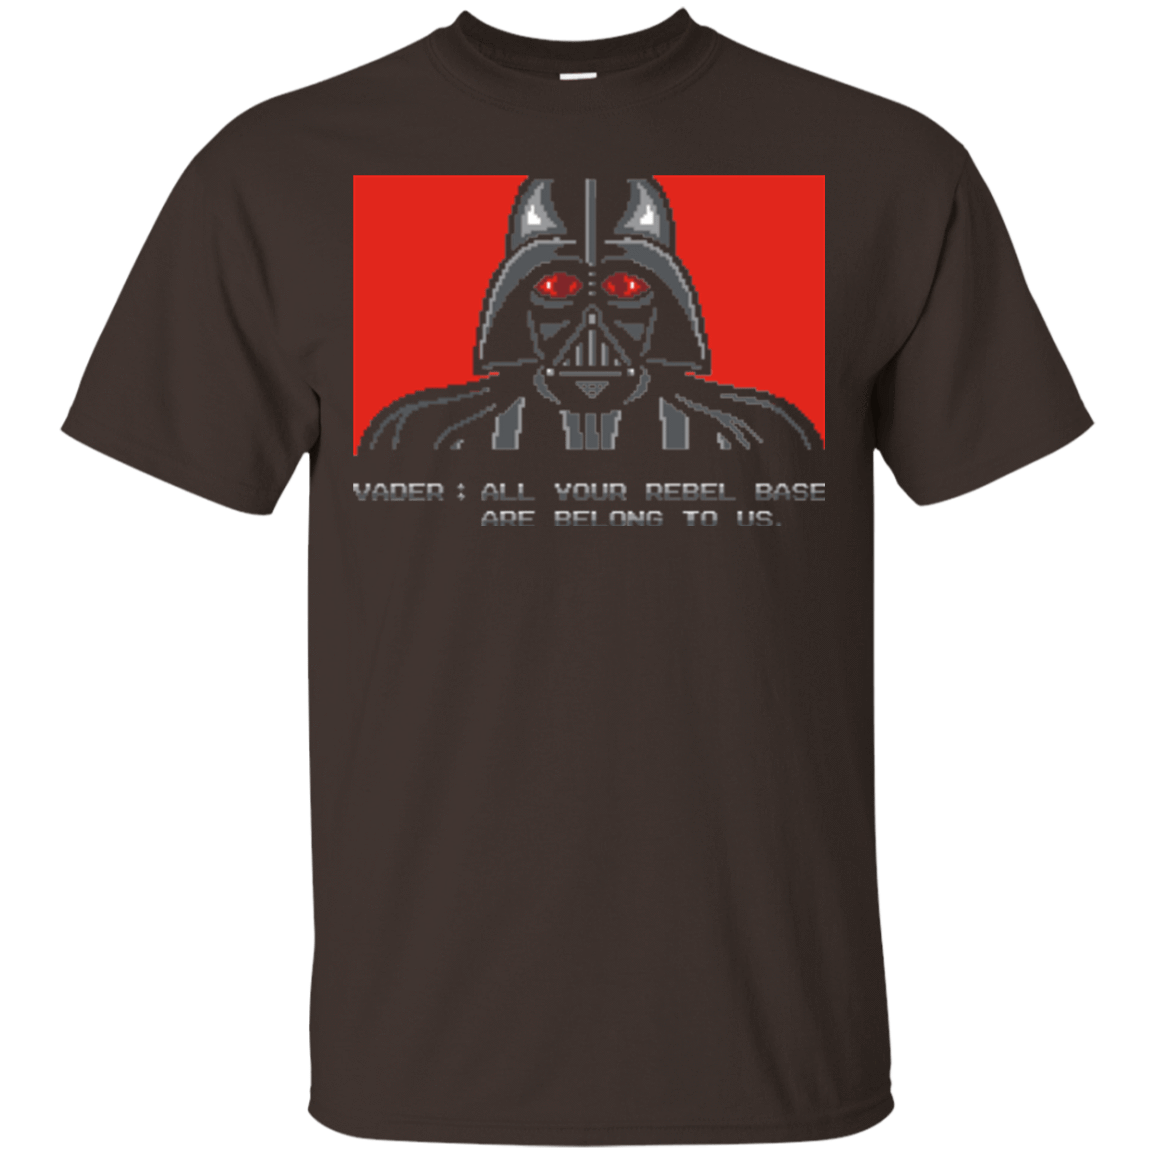 T-Shirts Dark Chocolate / Small All your rebel base are belongs to us T-Shirt